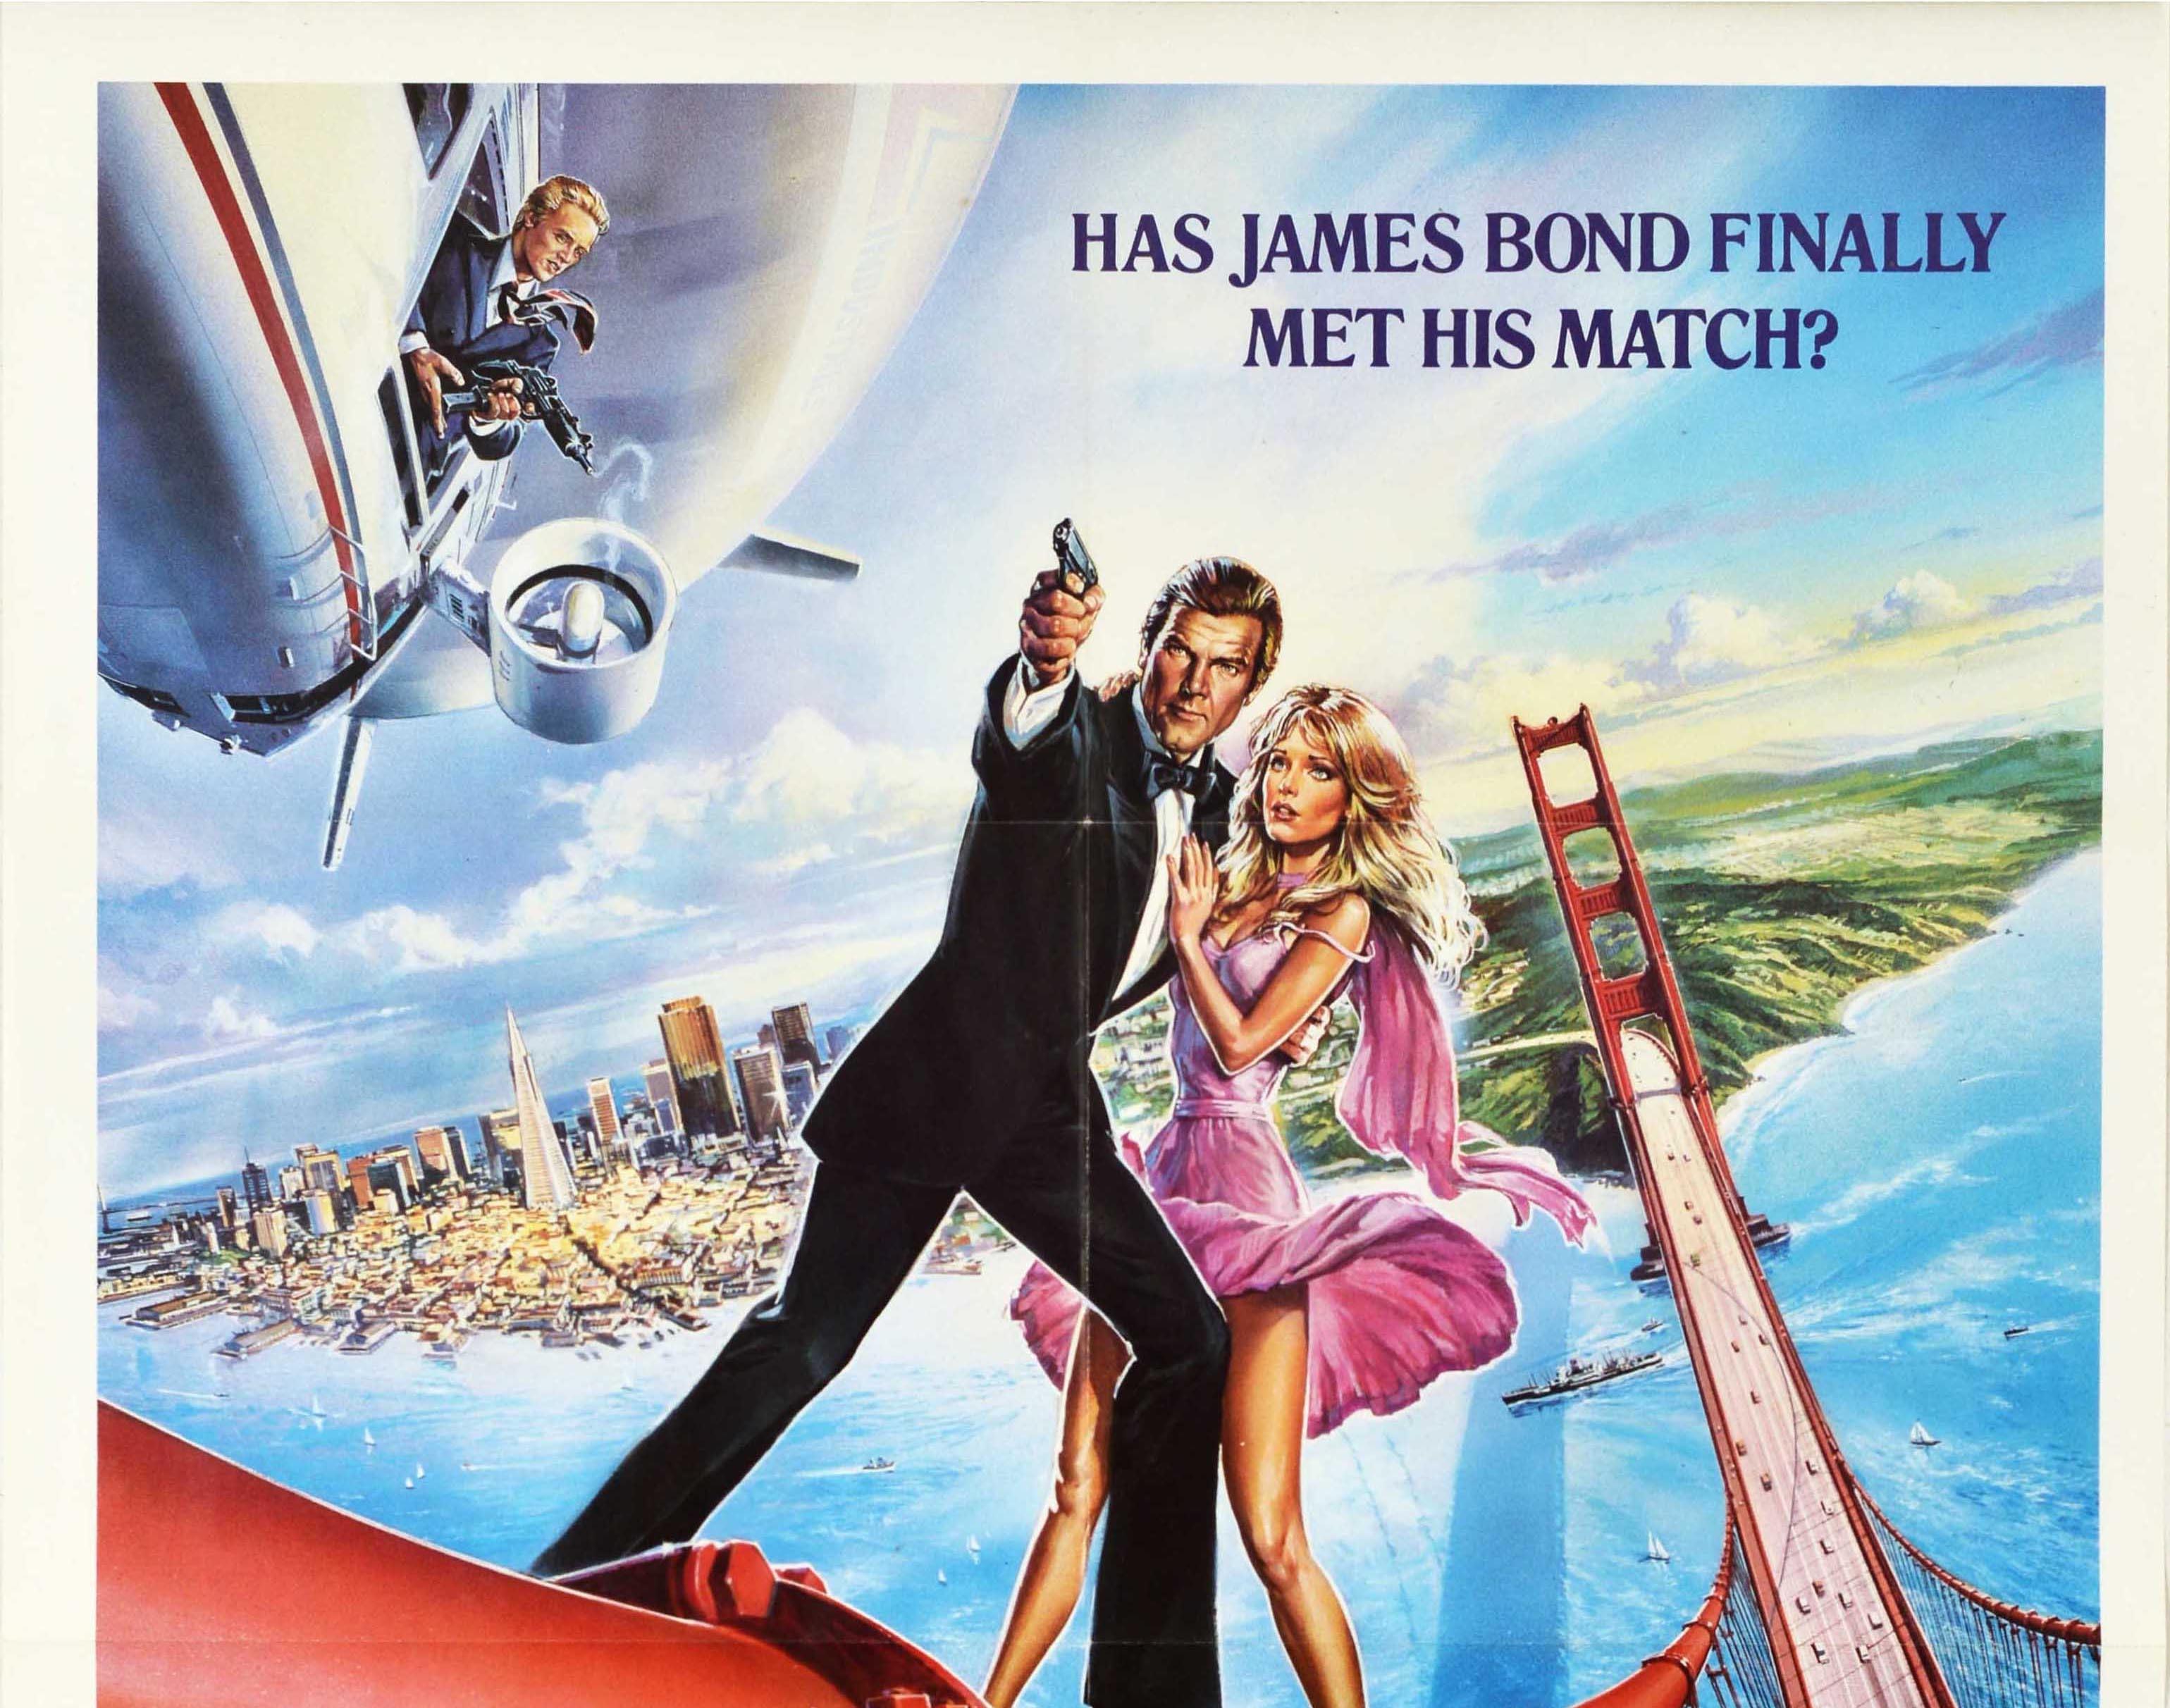 Original vintage movie poster for the James Bond 007 film A View To A Kill - Has James Bond finally met his match? - directed by John Glen starring Roger Moore as the British spy James Bond with Grace Jones as May Day, Christopher Walken as Bond